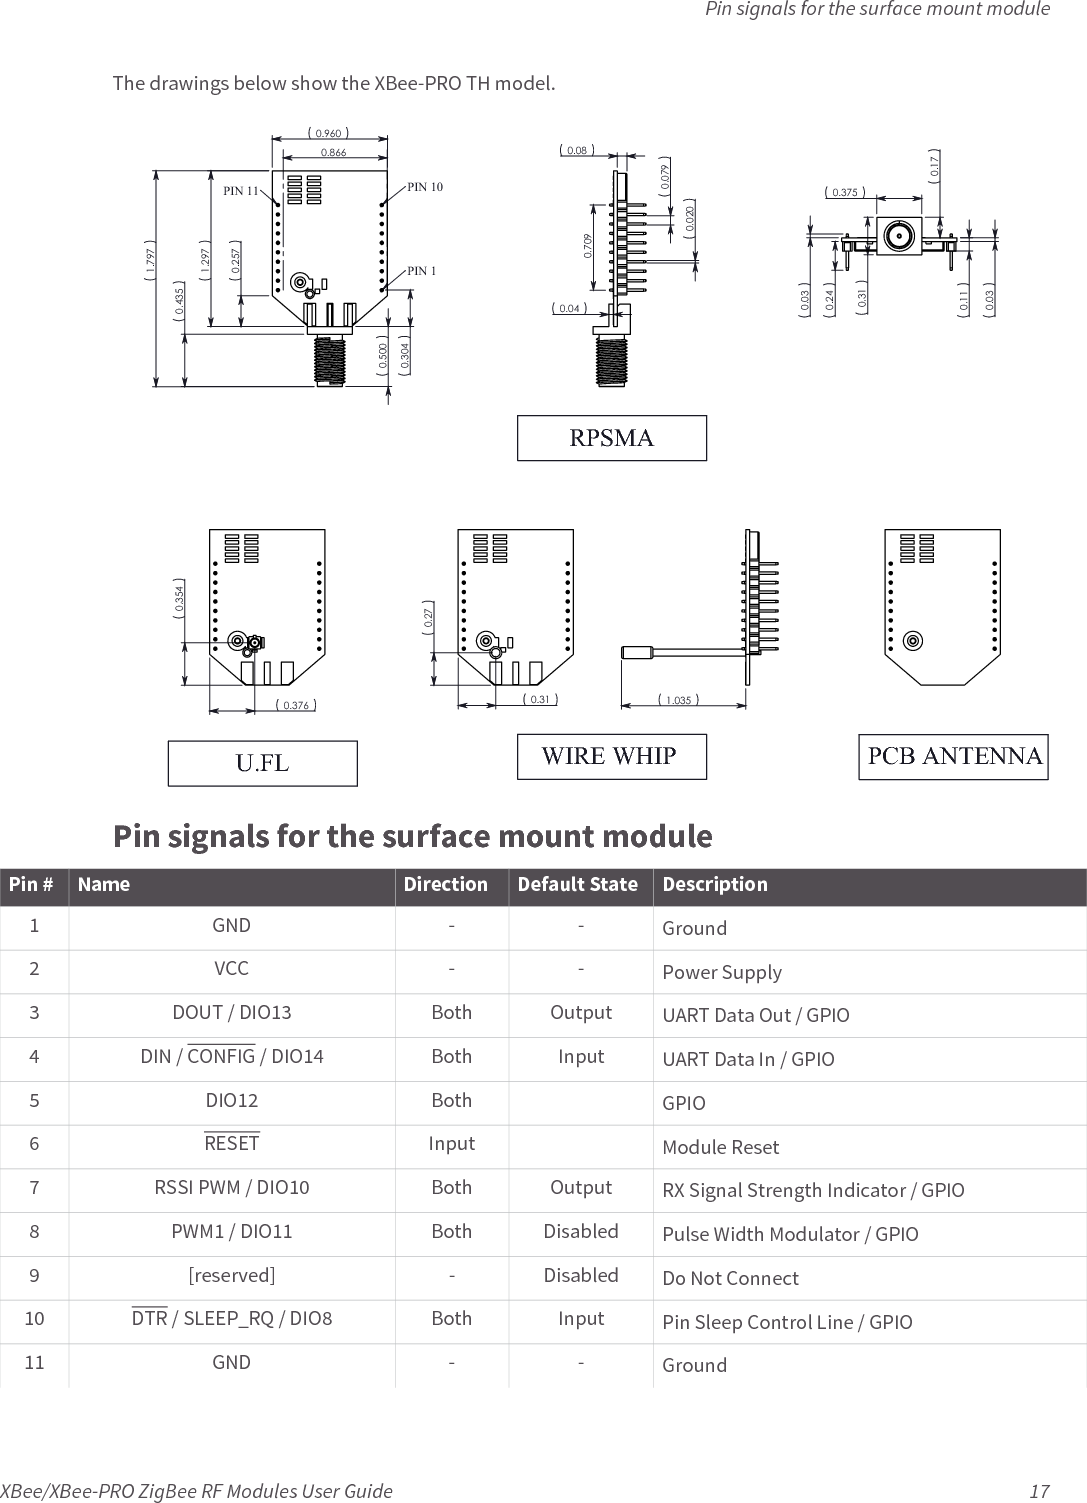 Pin signals for the surface mount moduleXBee/XBee-PRO ZigBee RF Modules User Guide 17The drawings below show the XBee-PRO TH model.Pin signals for the surface mount module3&amp;%$17(11$:,5(:+,38)/5360$3,1 3,13,1Pin # Name Direction Default State Description1GND --Ground2VCC --Power Supply3DOUT / DIO13 BothOutputUART Data Out / GPIO4 DIN / CONFIG / DIO14 Both Input UART Data In / GPIO5DIO12 Both GPIO6RESET Input Module Reset7 RSSI PWM / DIO10 Both Output RX Signal Strength Indicator / GPIO8PWM1 / DIO11 BothDisabledPulse Width Modulator / GPIO9 [reserved] - Disabled Do Not Connect10 DTR / SLEEP_RQ / DIO8 Both Input Pin Sleep Control Line / GPIO11 GND - - Ground